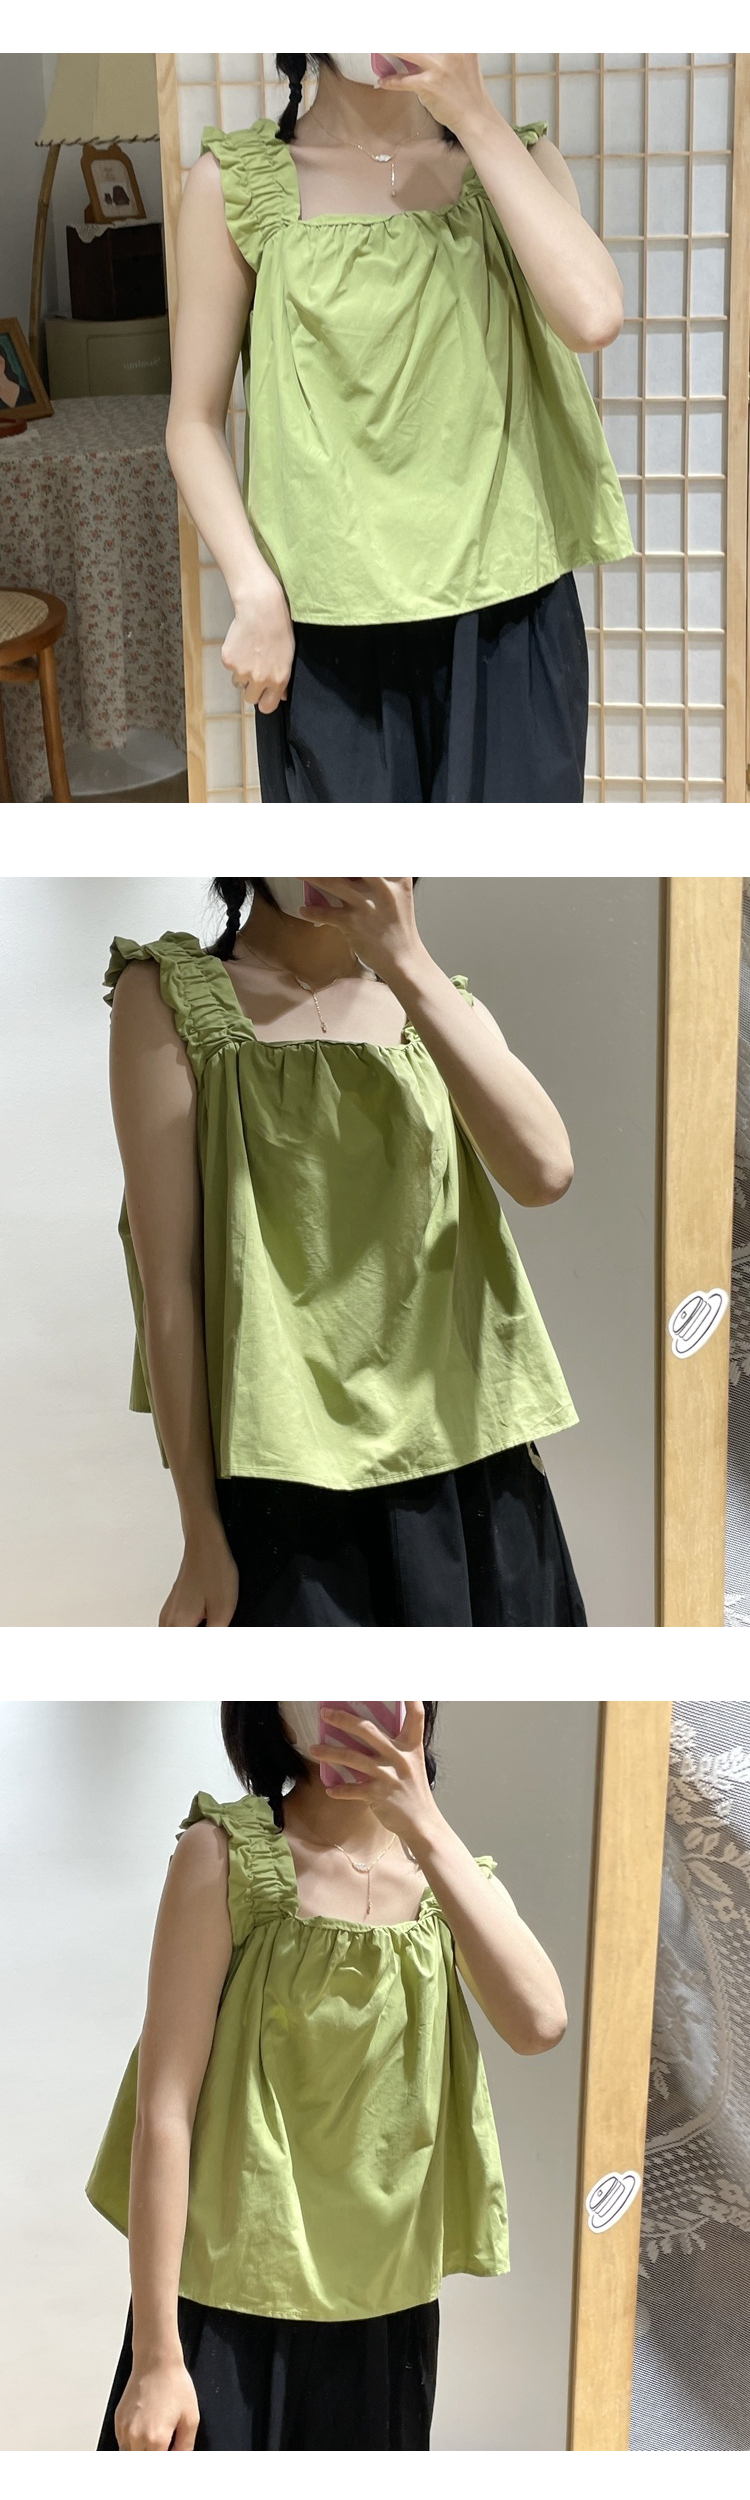 KOIN COLLECTION Square Frill Banding Sleeveless Blouse Light Green Color & Free Size 9